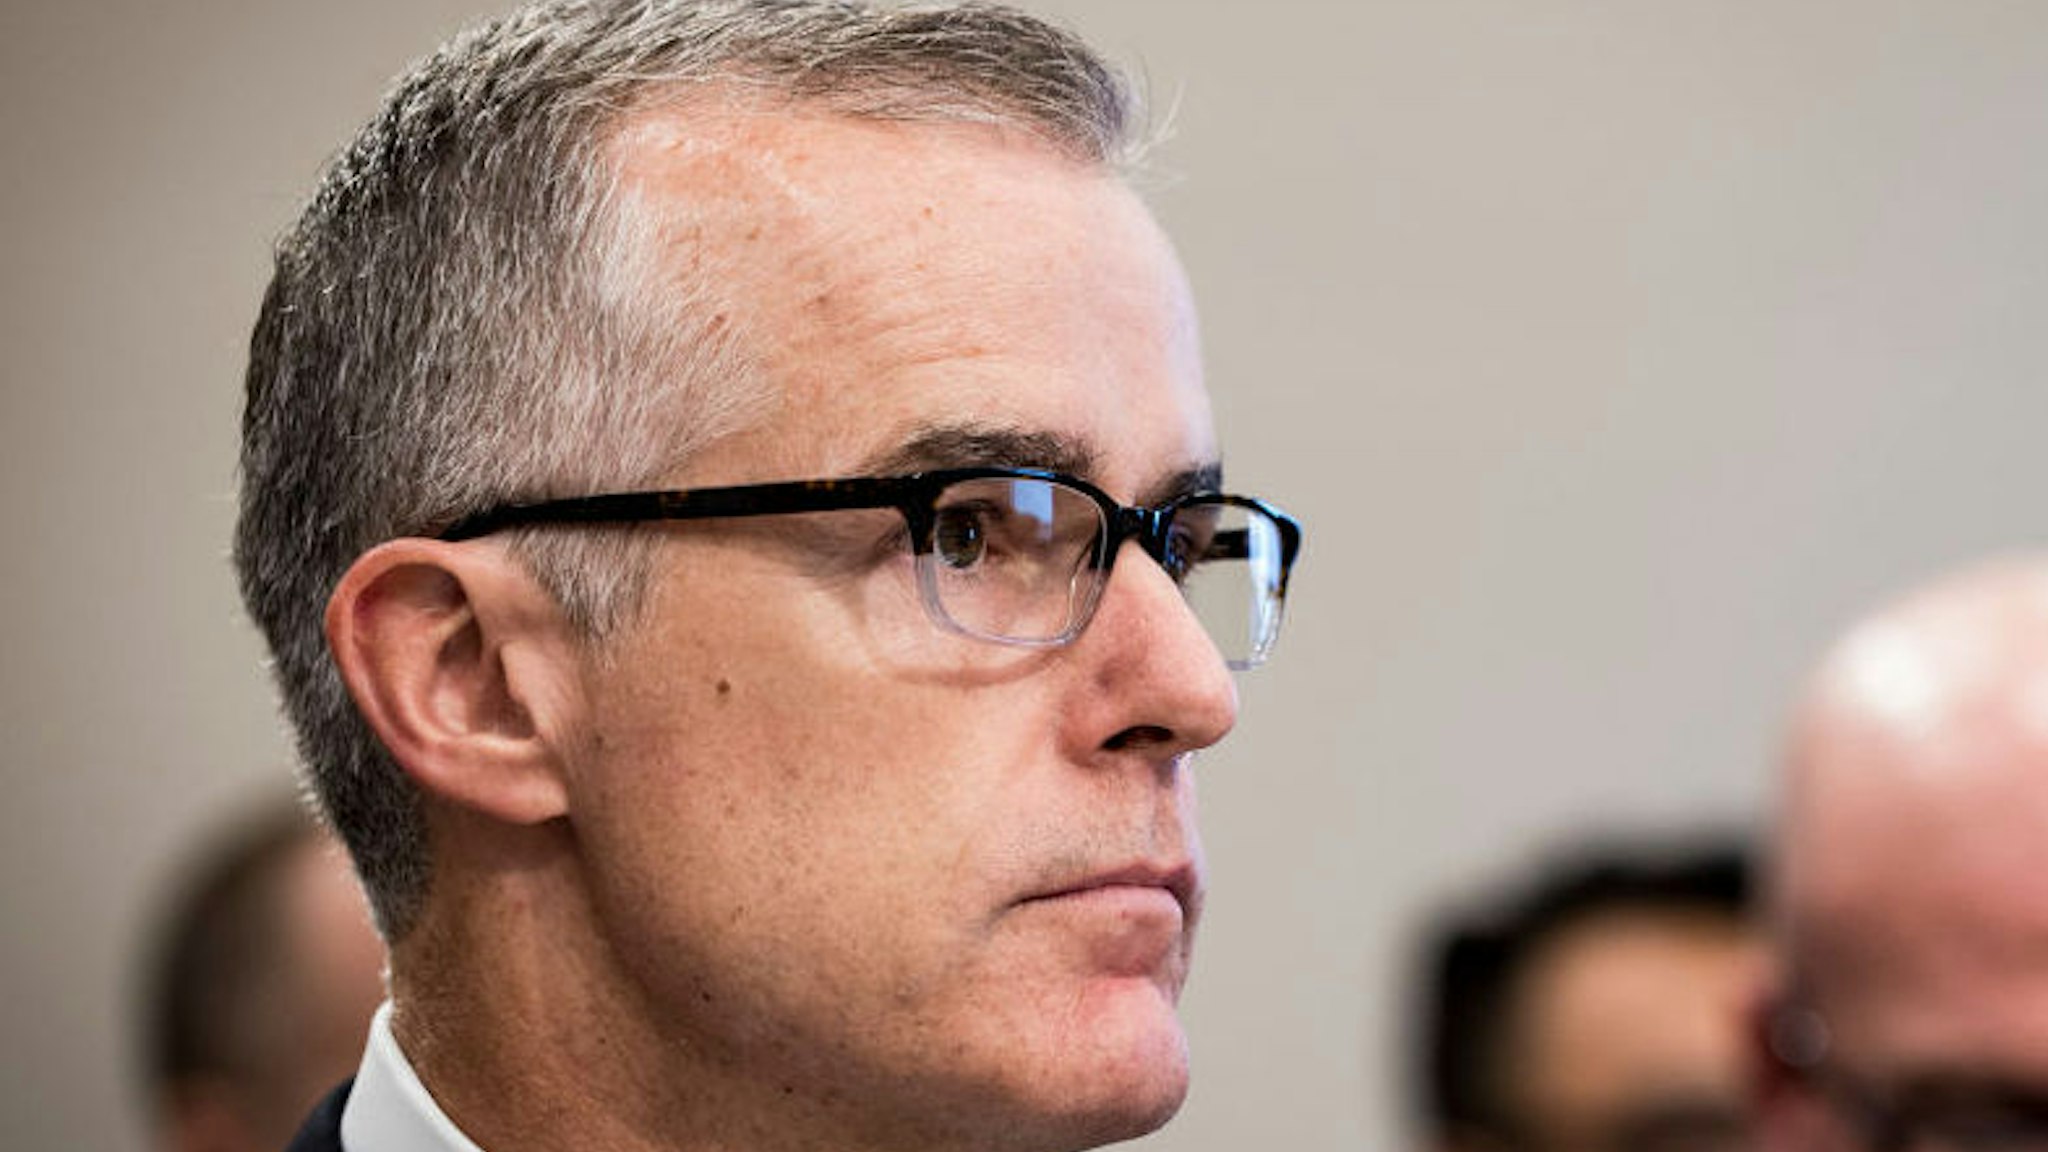 WASHINGTON, DC - June 21: Acting FBI Director Andrew McCabe testifies before a House Appropriations subcommittee meeting on the FBI's budget requests for FY2018 on June 21, 2017 in Washington, DC. McCabe became acting director in May, following President Trump's dismissal of James Comey